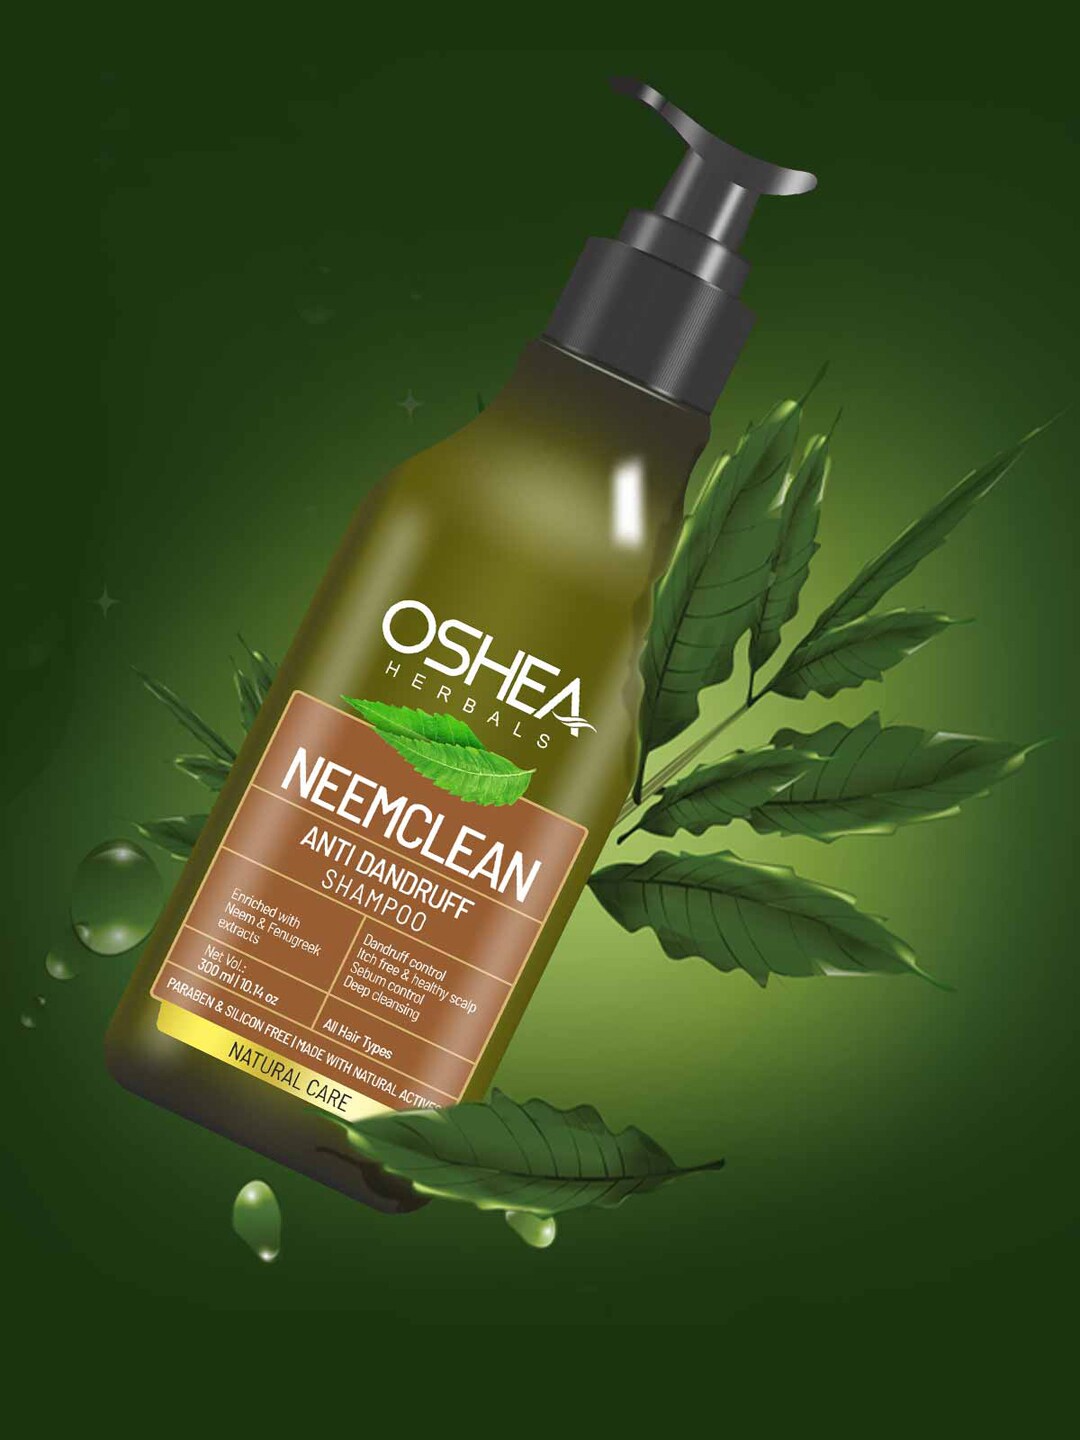 Oshea Herbals Neemclean Anti Dandruff Shampoo with Fenugreek Extracts 300  ml Price in India, Full Specifications & Offers 